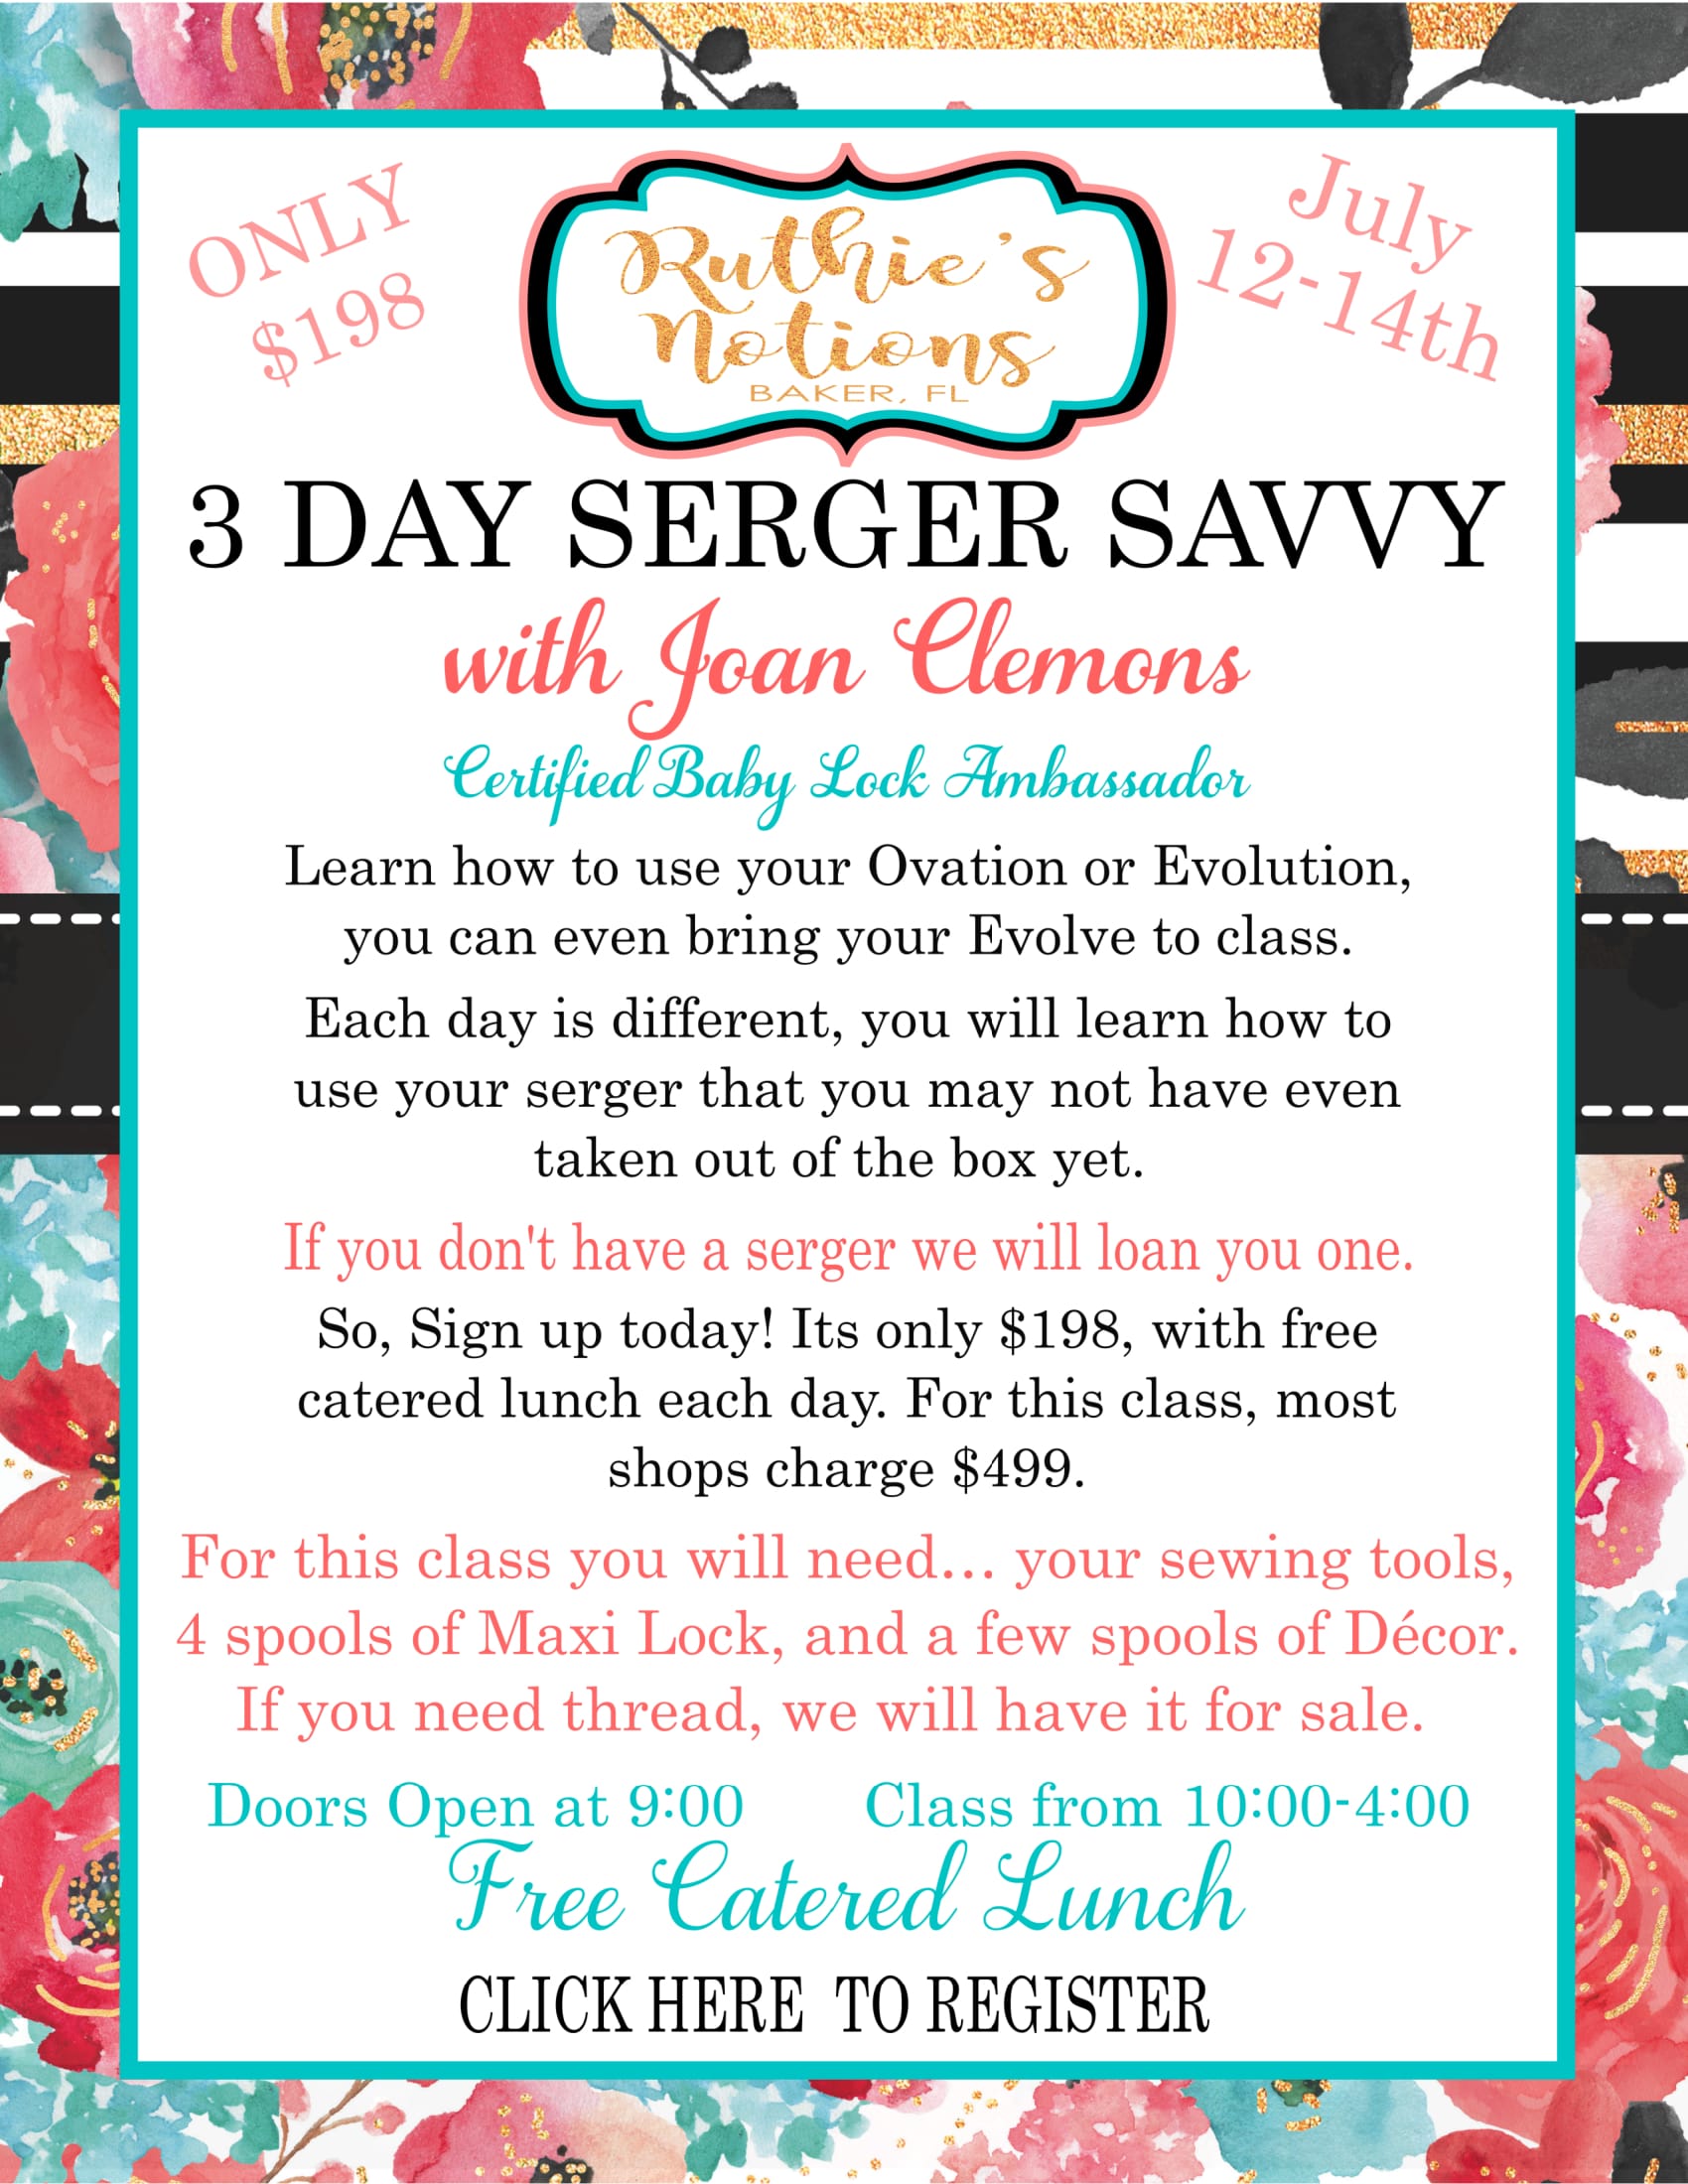 Serger Savvy with Joan